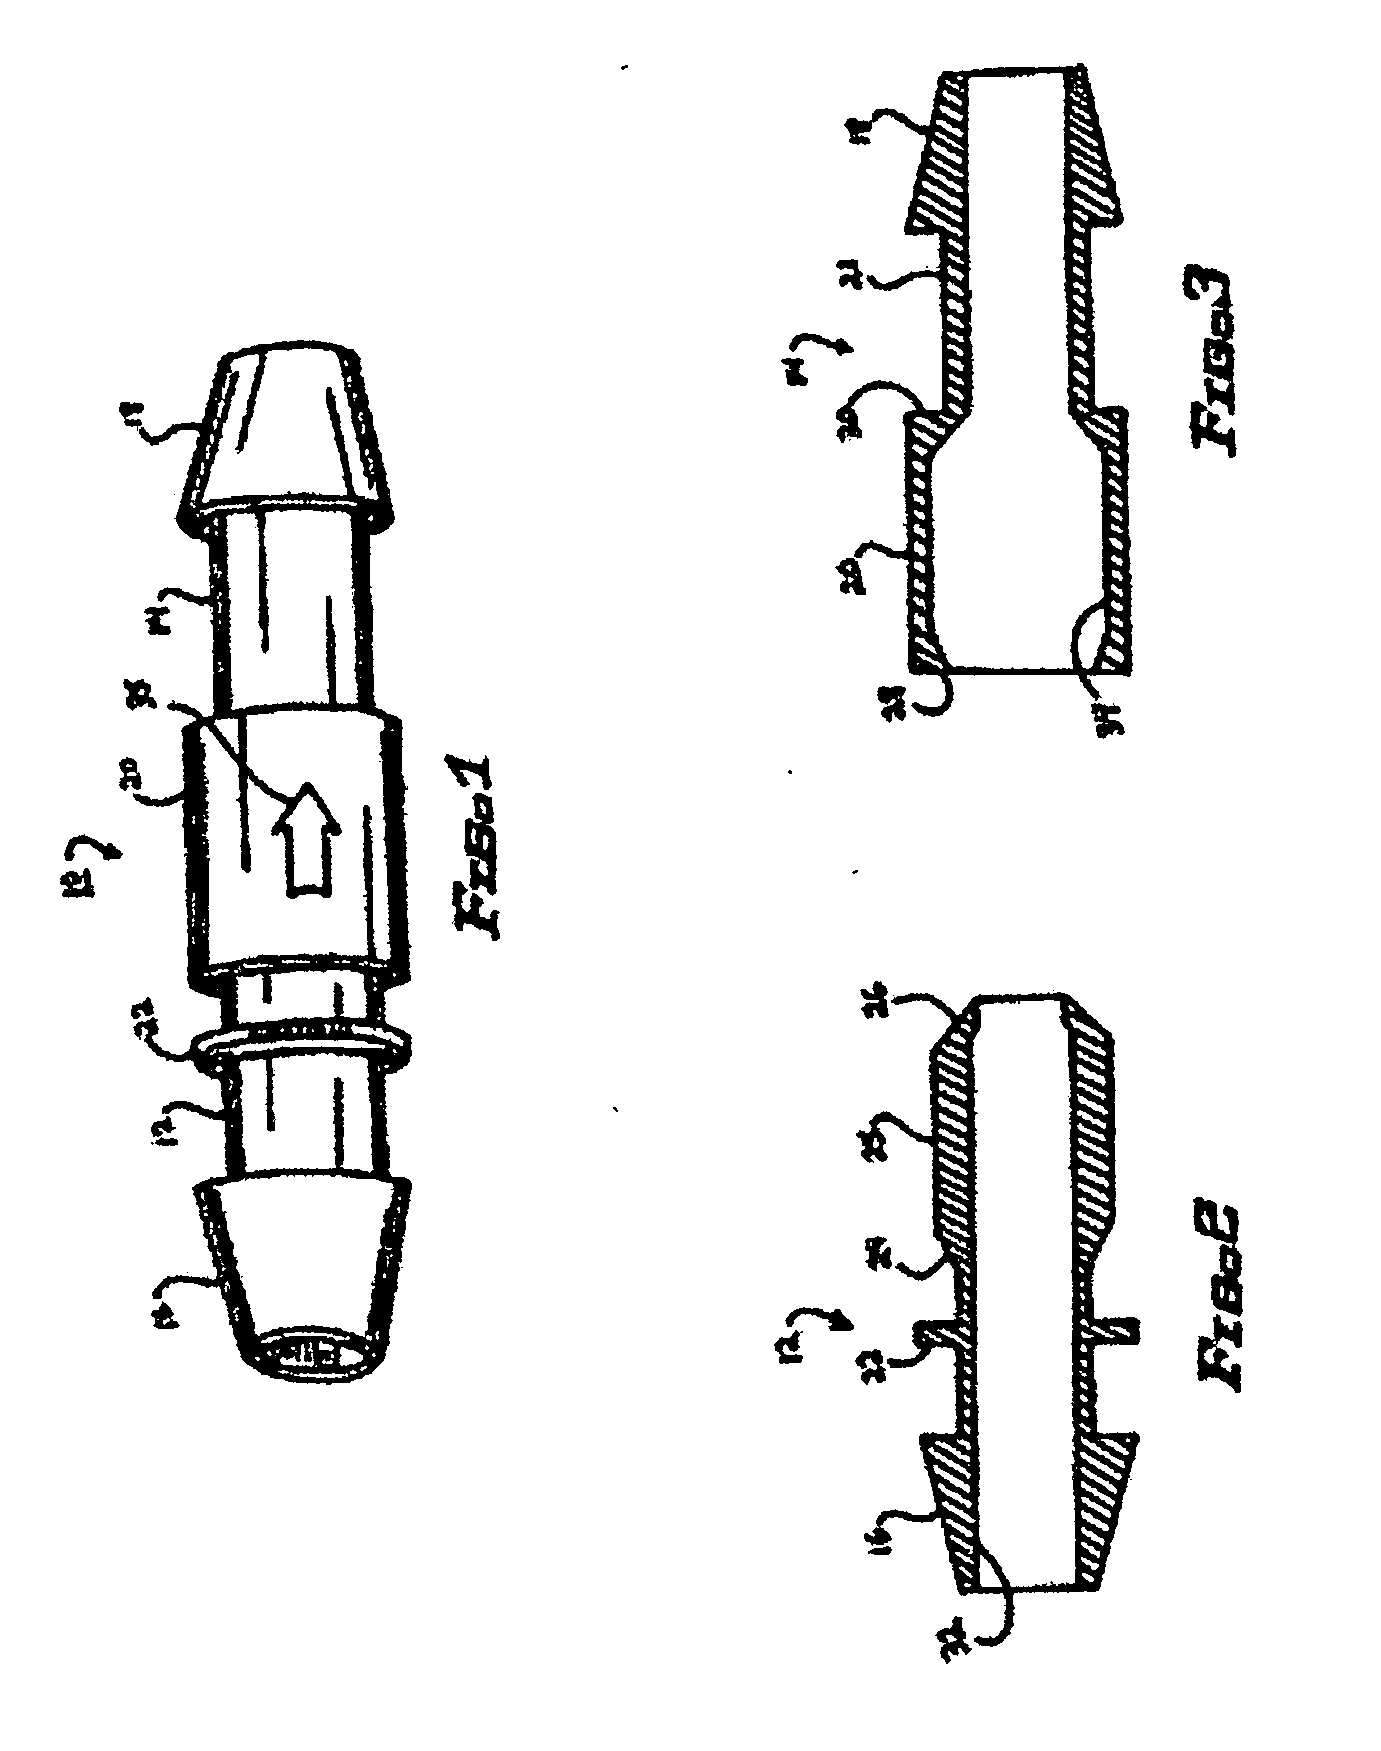 Swivel device for improved surgical smoke evacuation